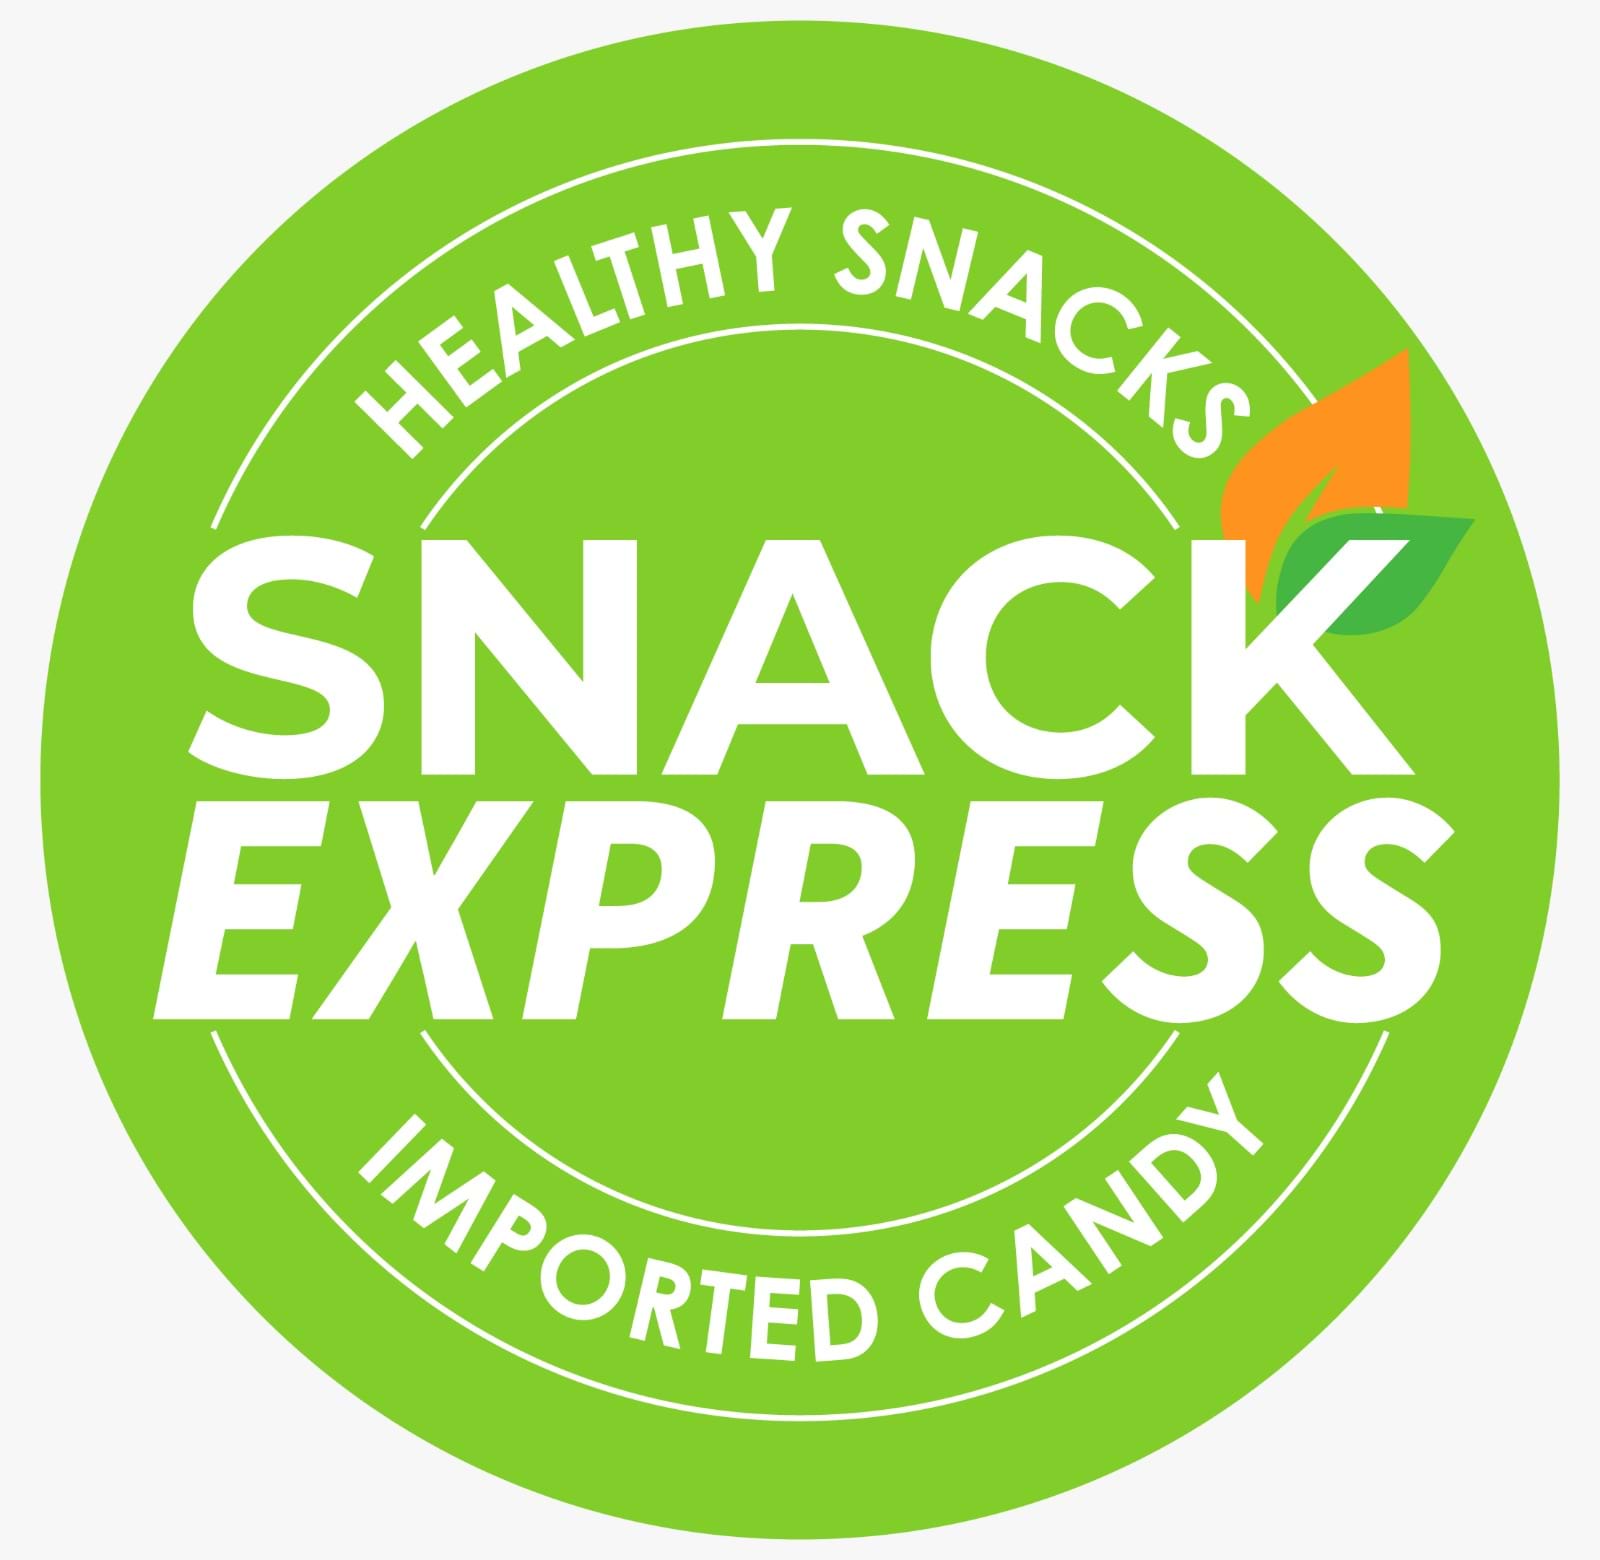 Snack Express